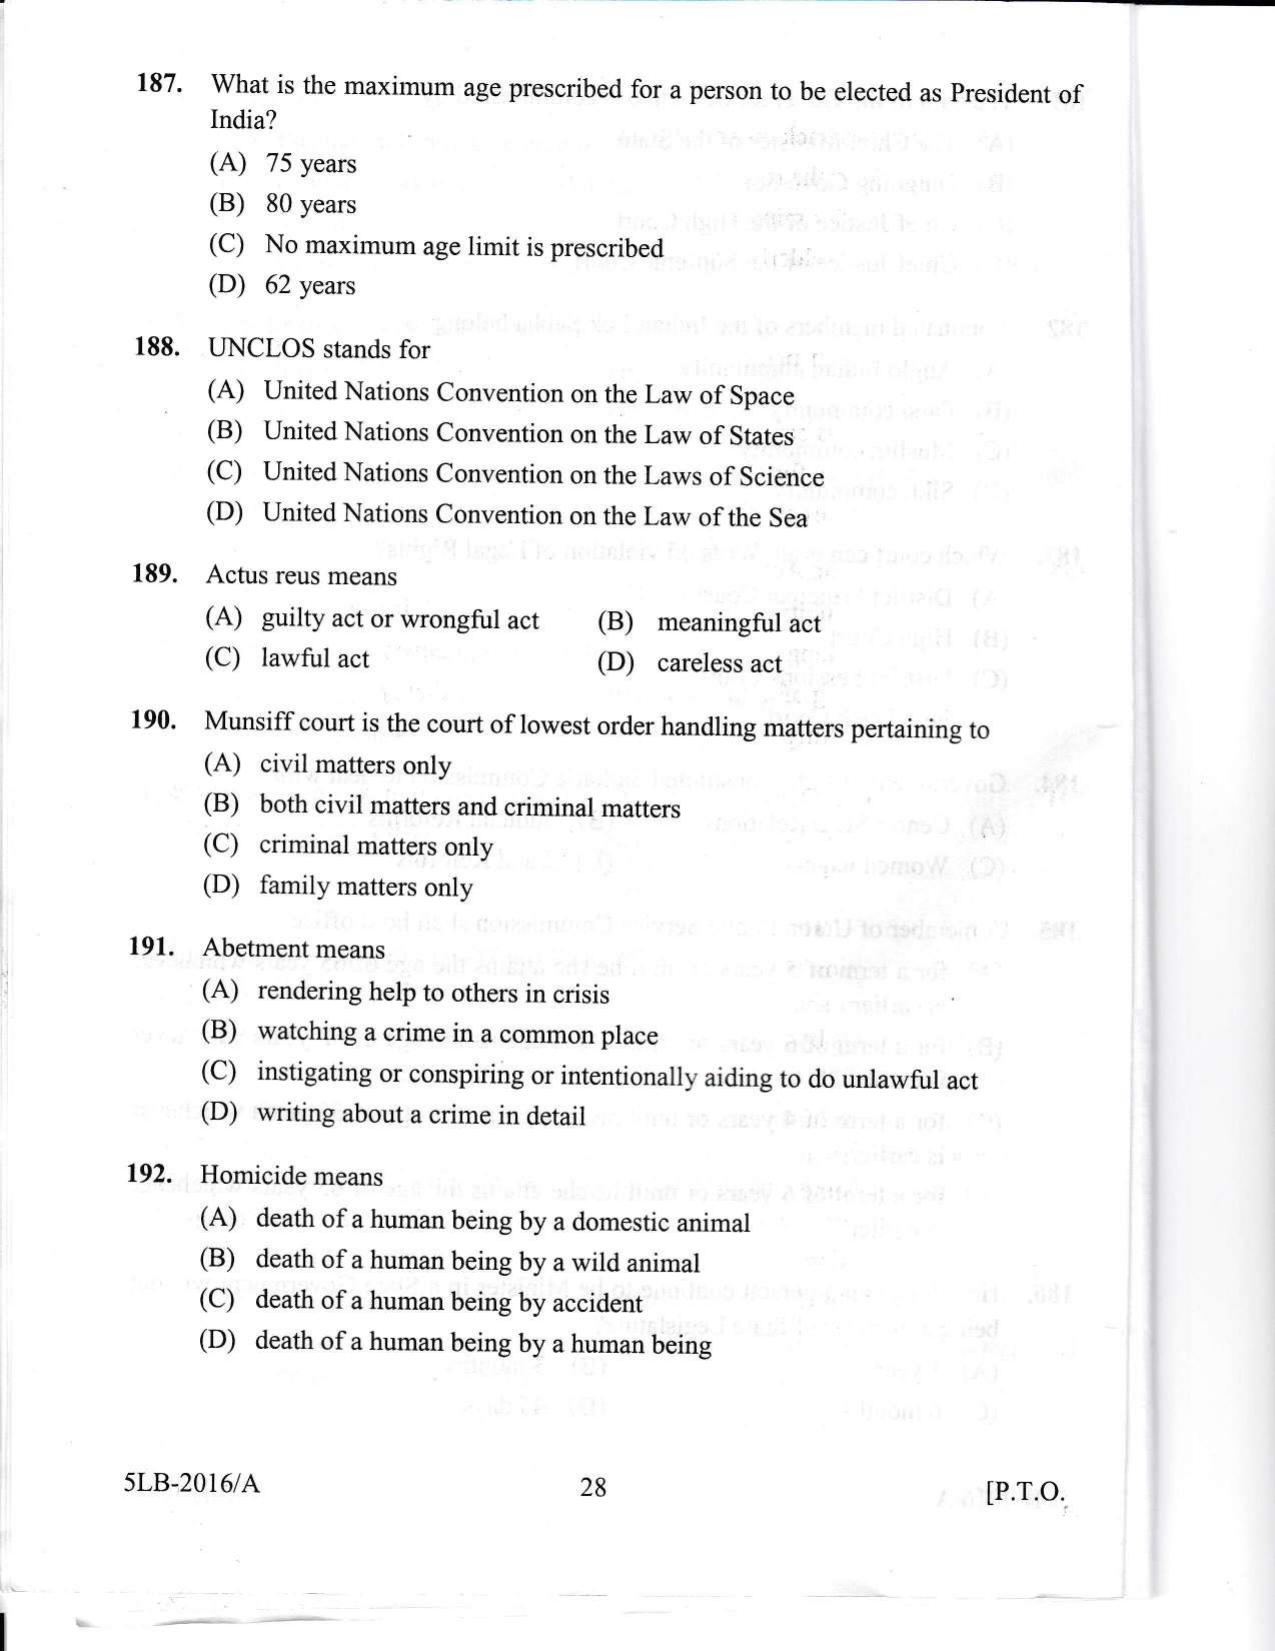 KLEE 5 Year LLB Exam 2016 Question Paper - Page 28